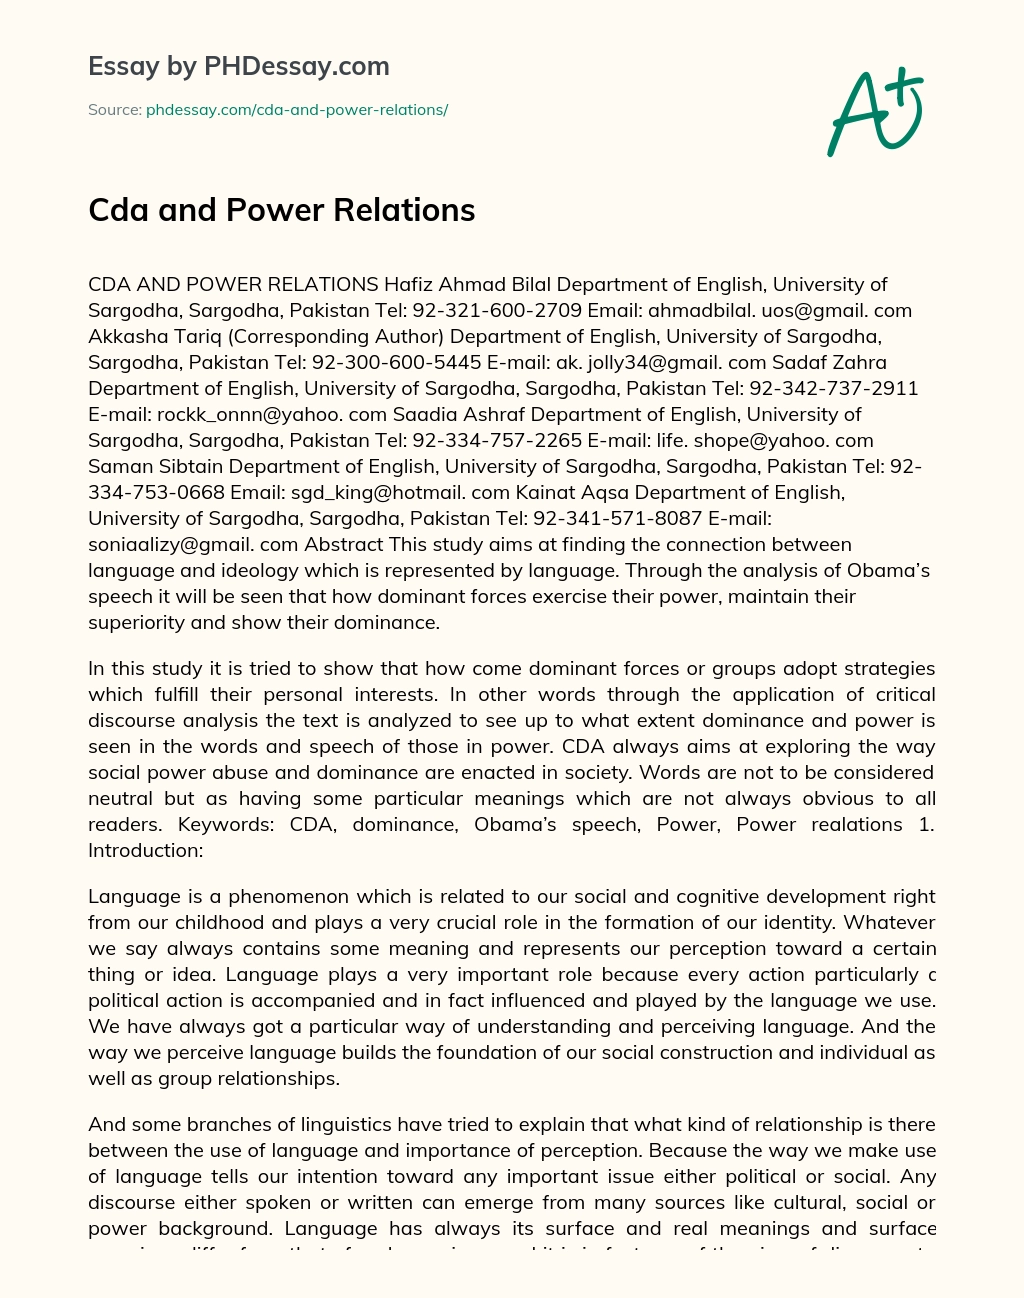 CDA and Power Relations essay